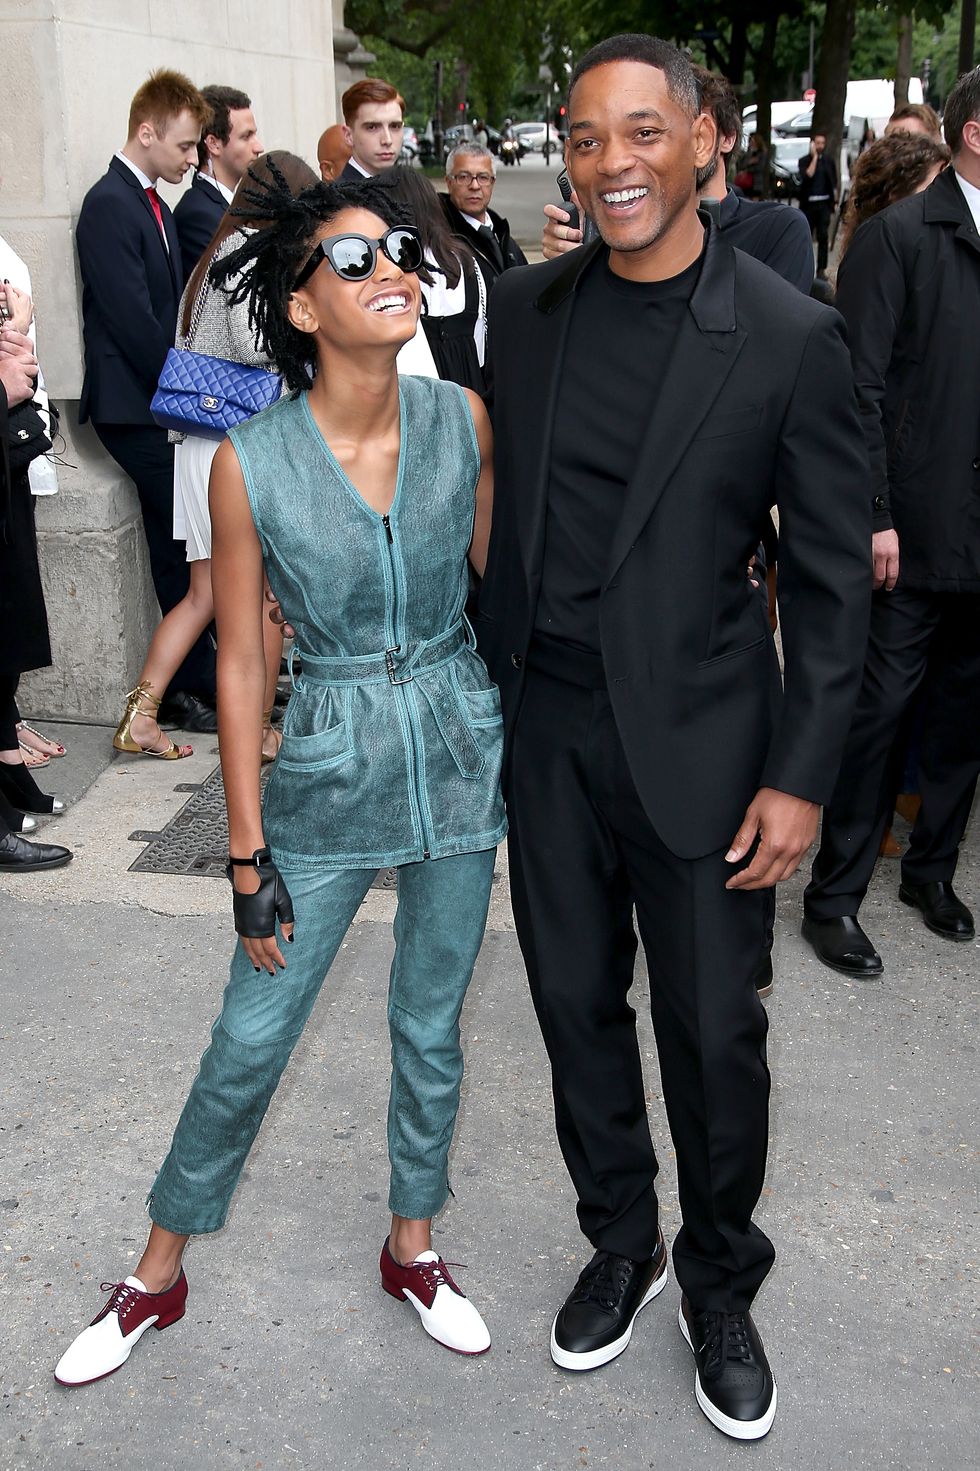 Willow Smith and Will Smith at Chanel's haute couture fashion week show